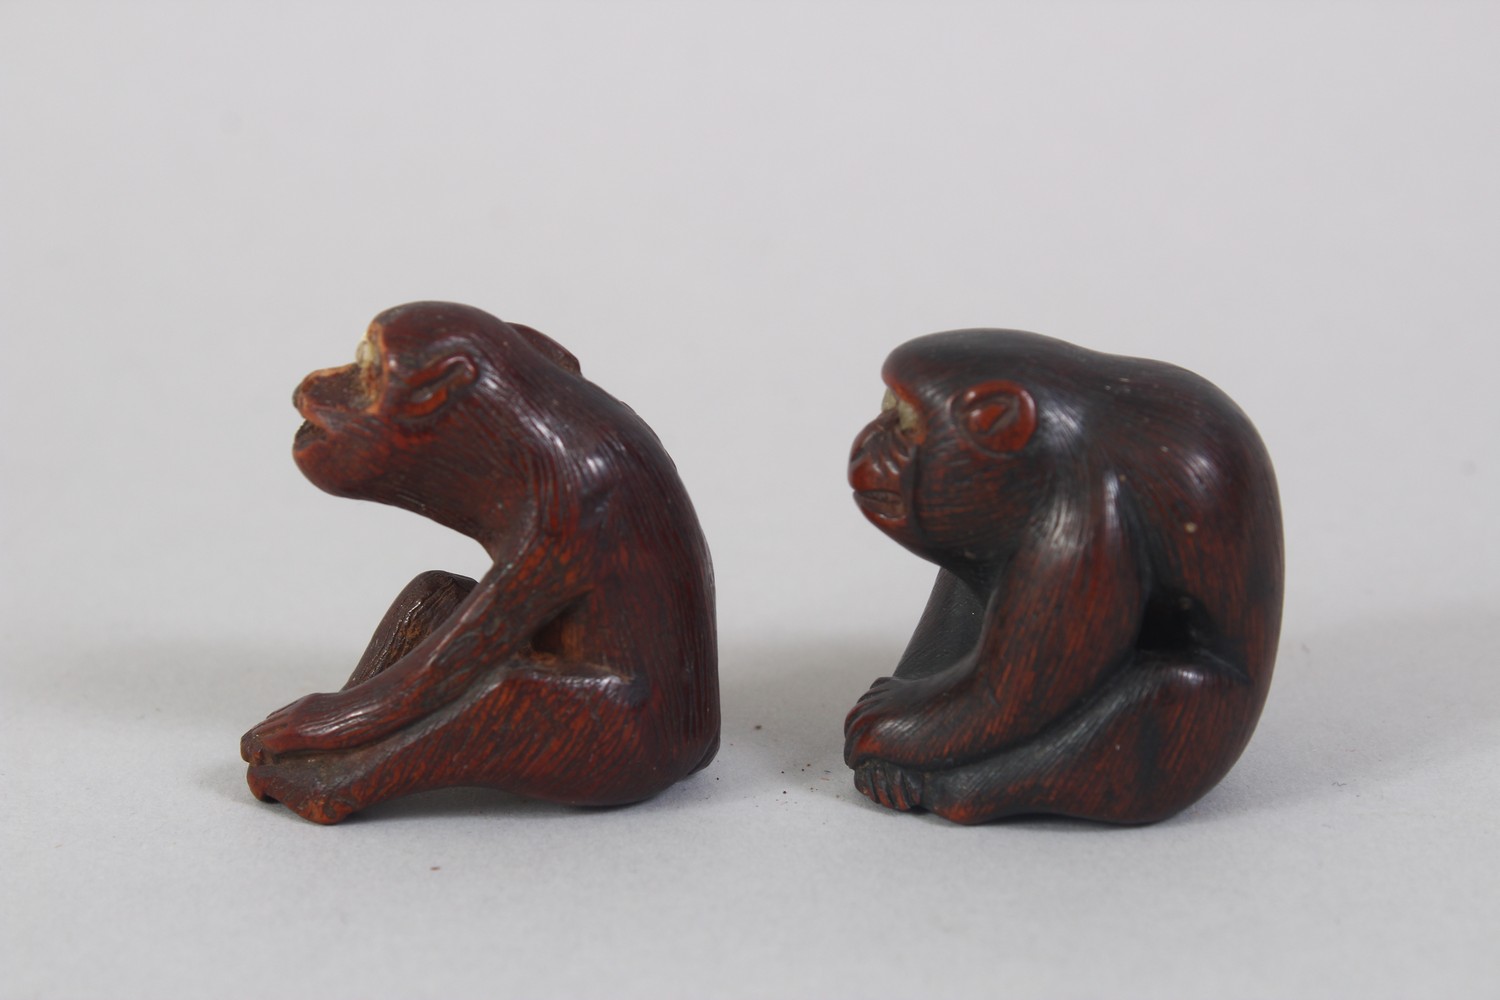 TWO GOOD JAPANESE MEIJI PERIOD CARVED WOODEN NETSUKE OF MONKEYS, both monkeys in seated positions - Image 2 of 4